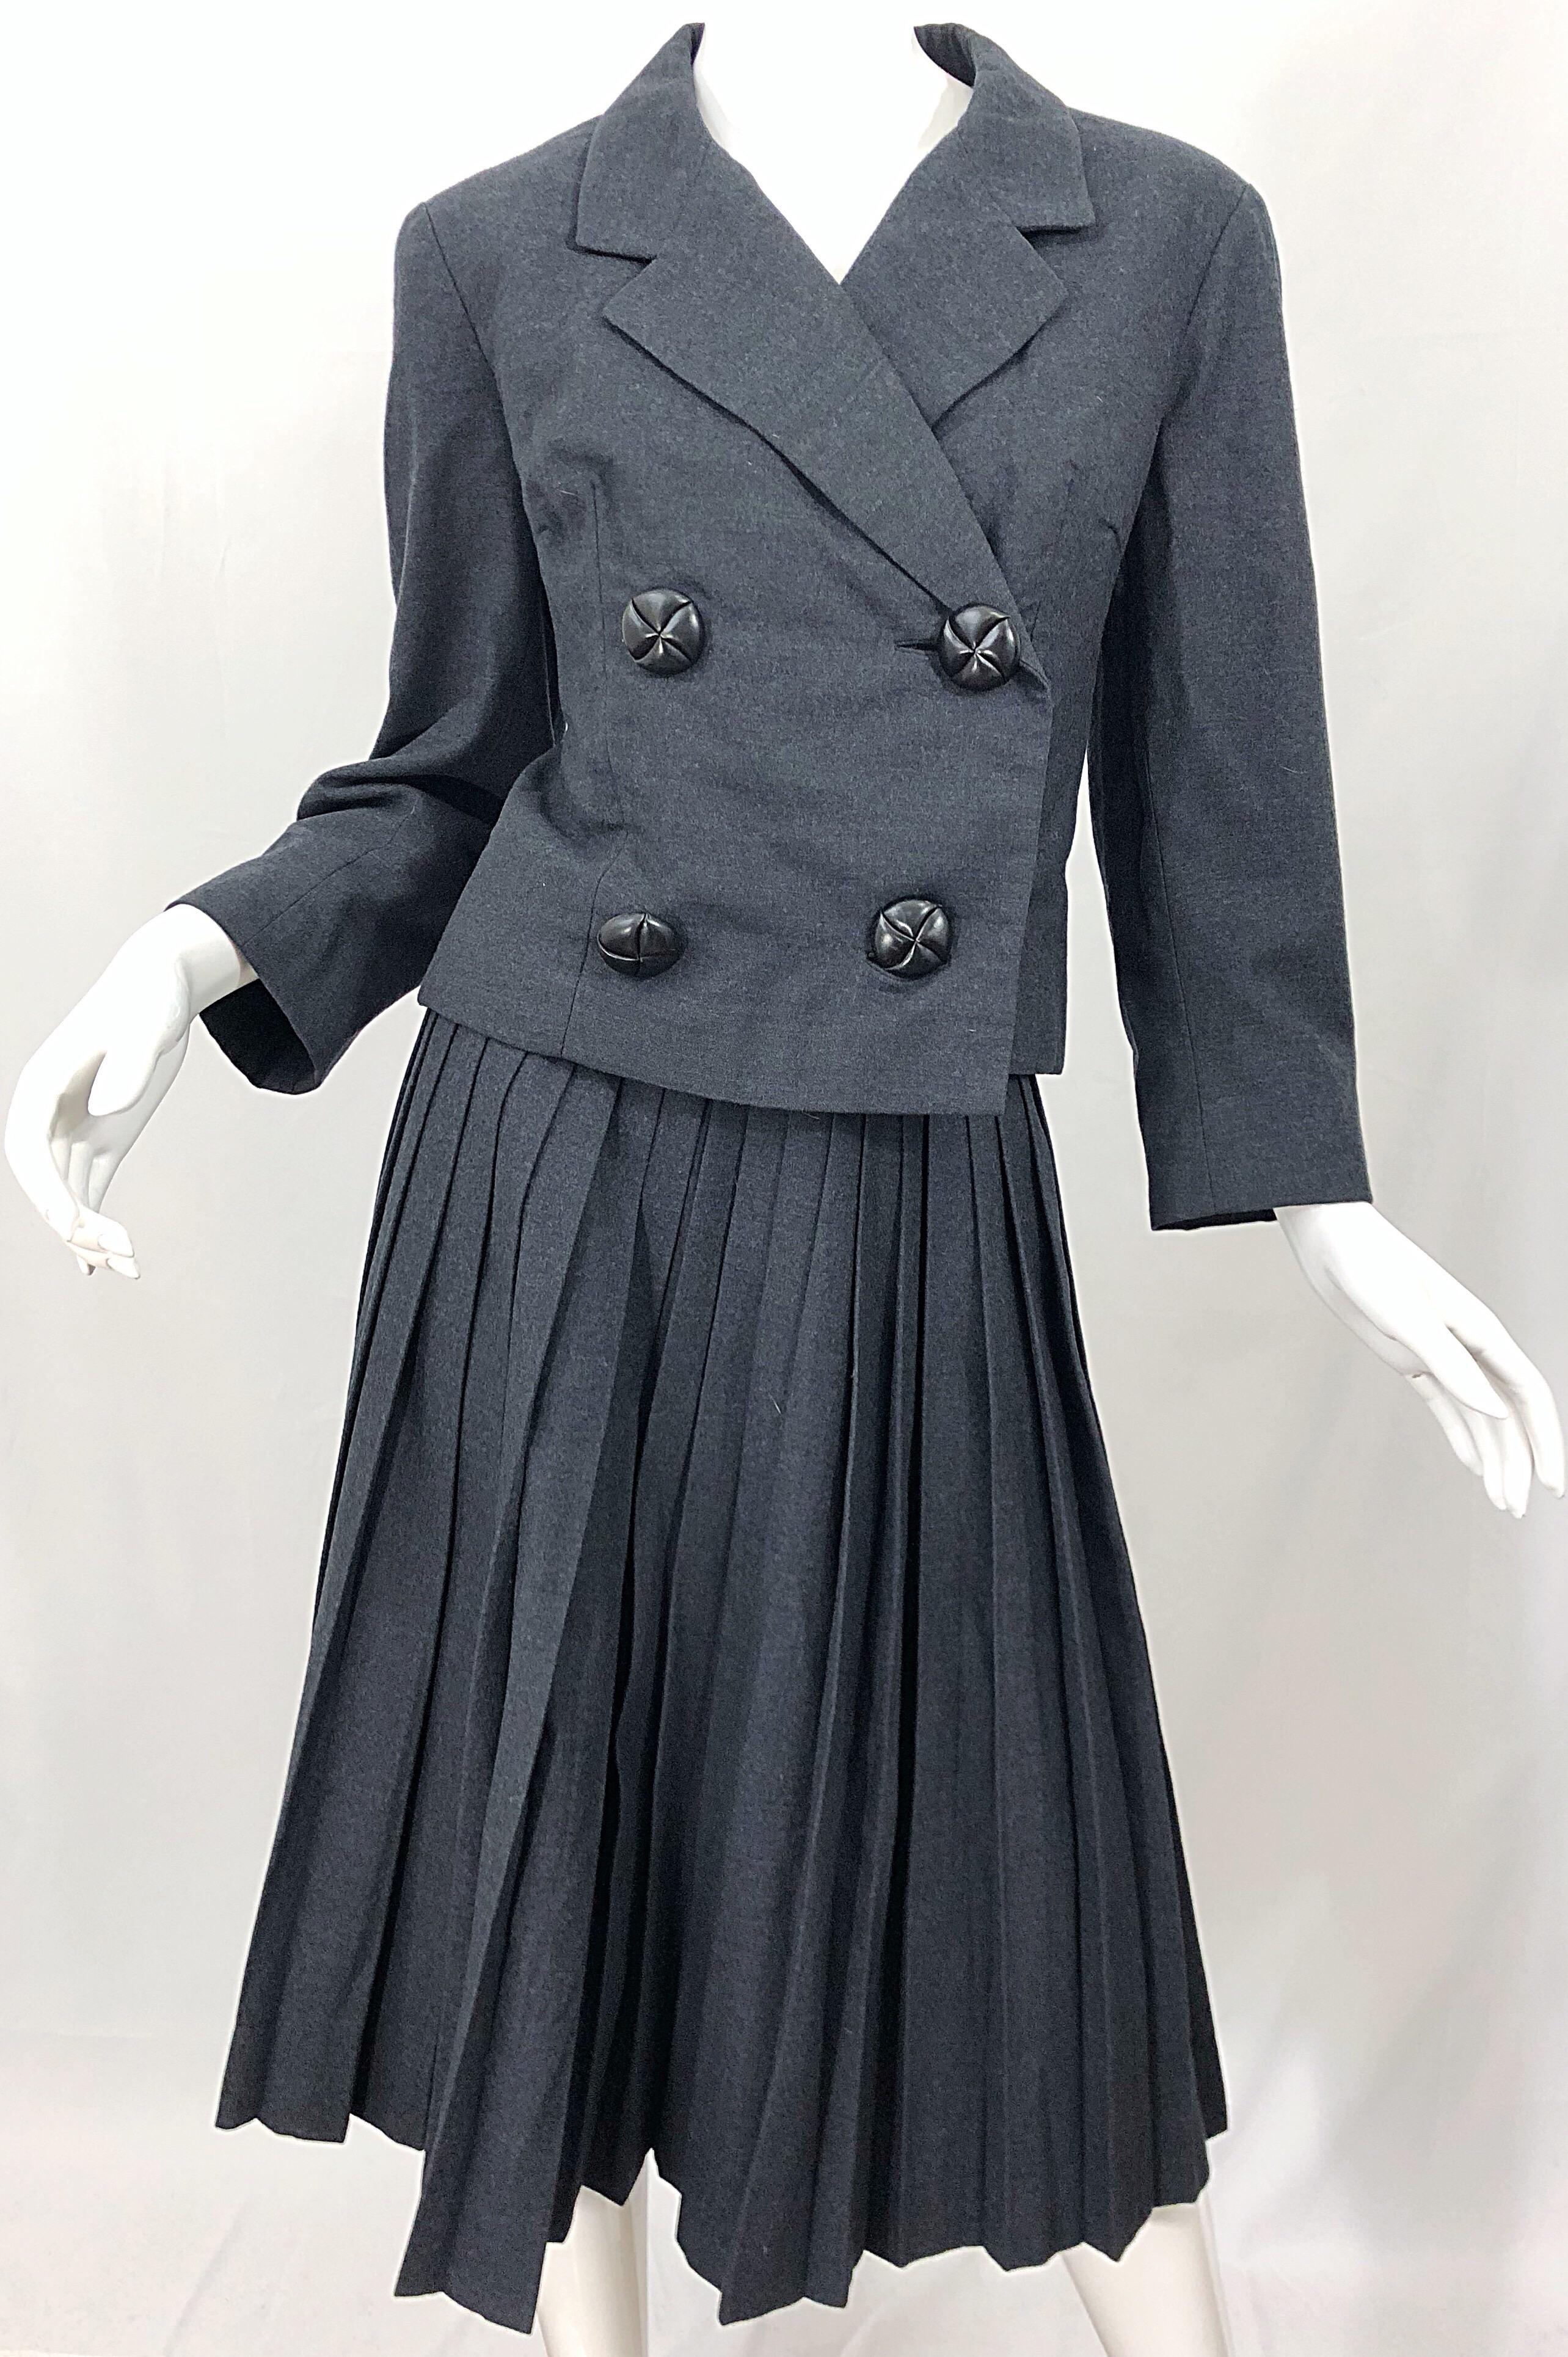 Women's 1960s Christian Dior Demi Couture Charcoal Grey Classic Vintage 60s Skirt Suit